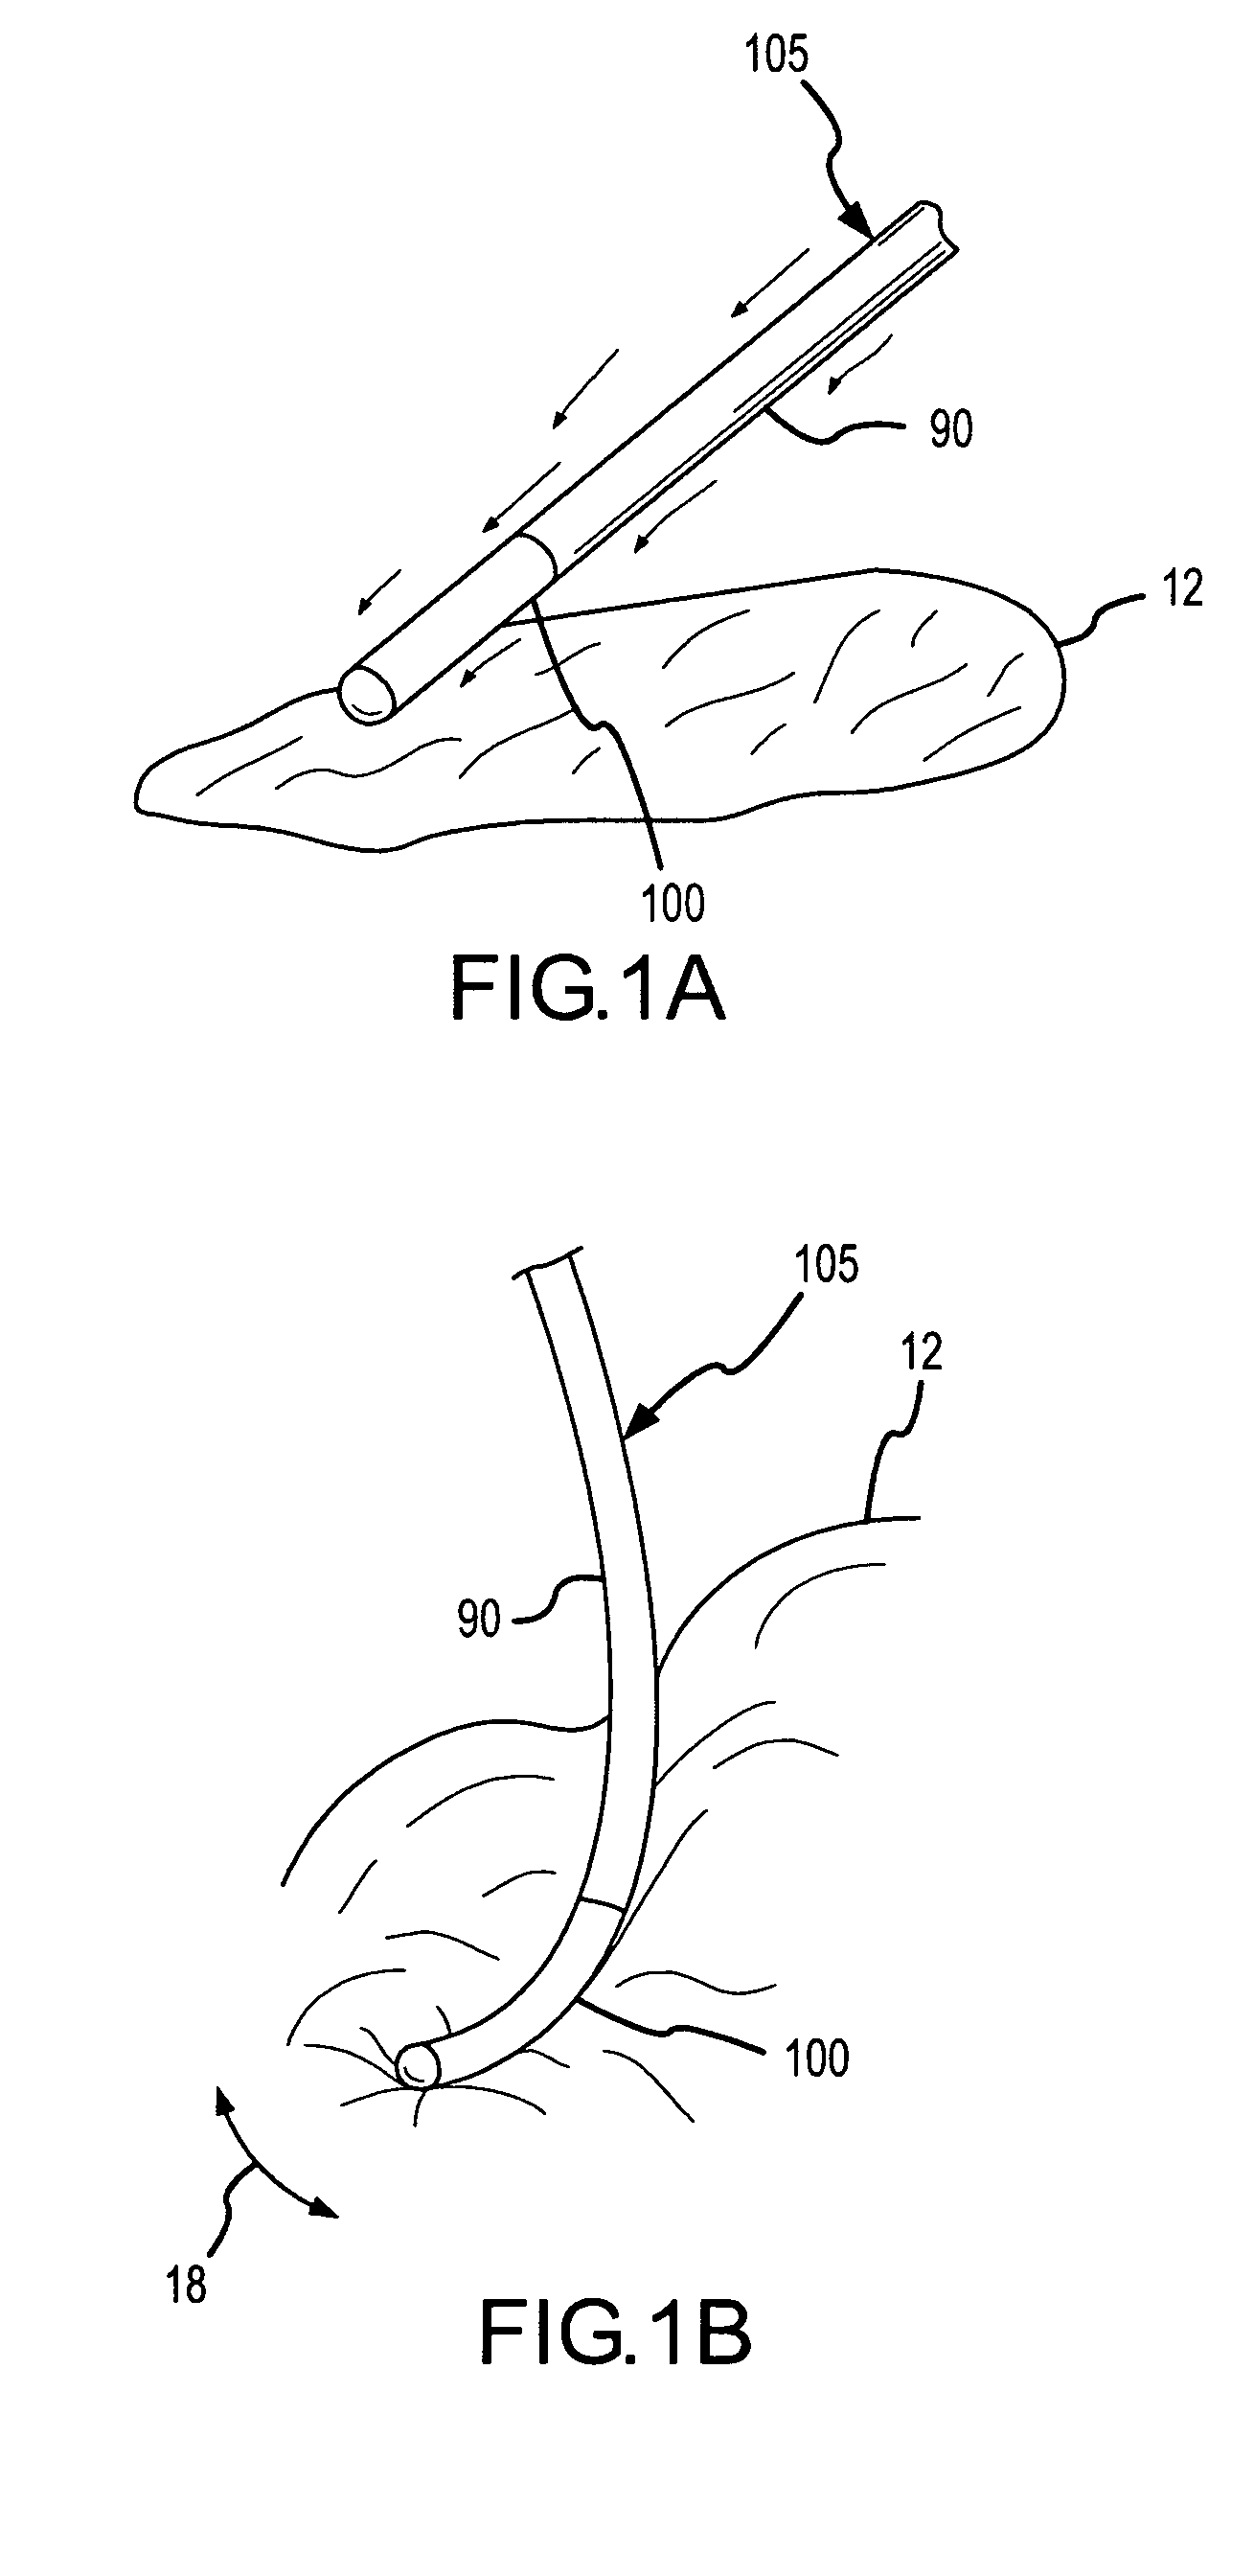 Contact-sensitive pressure-sensitive conductive composite electrode and method for ablation